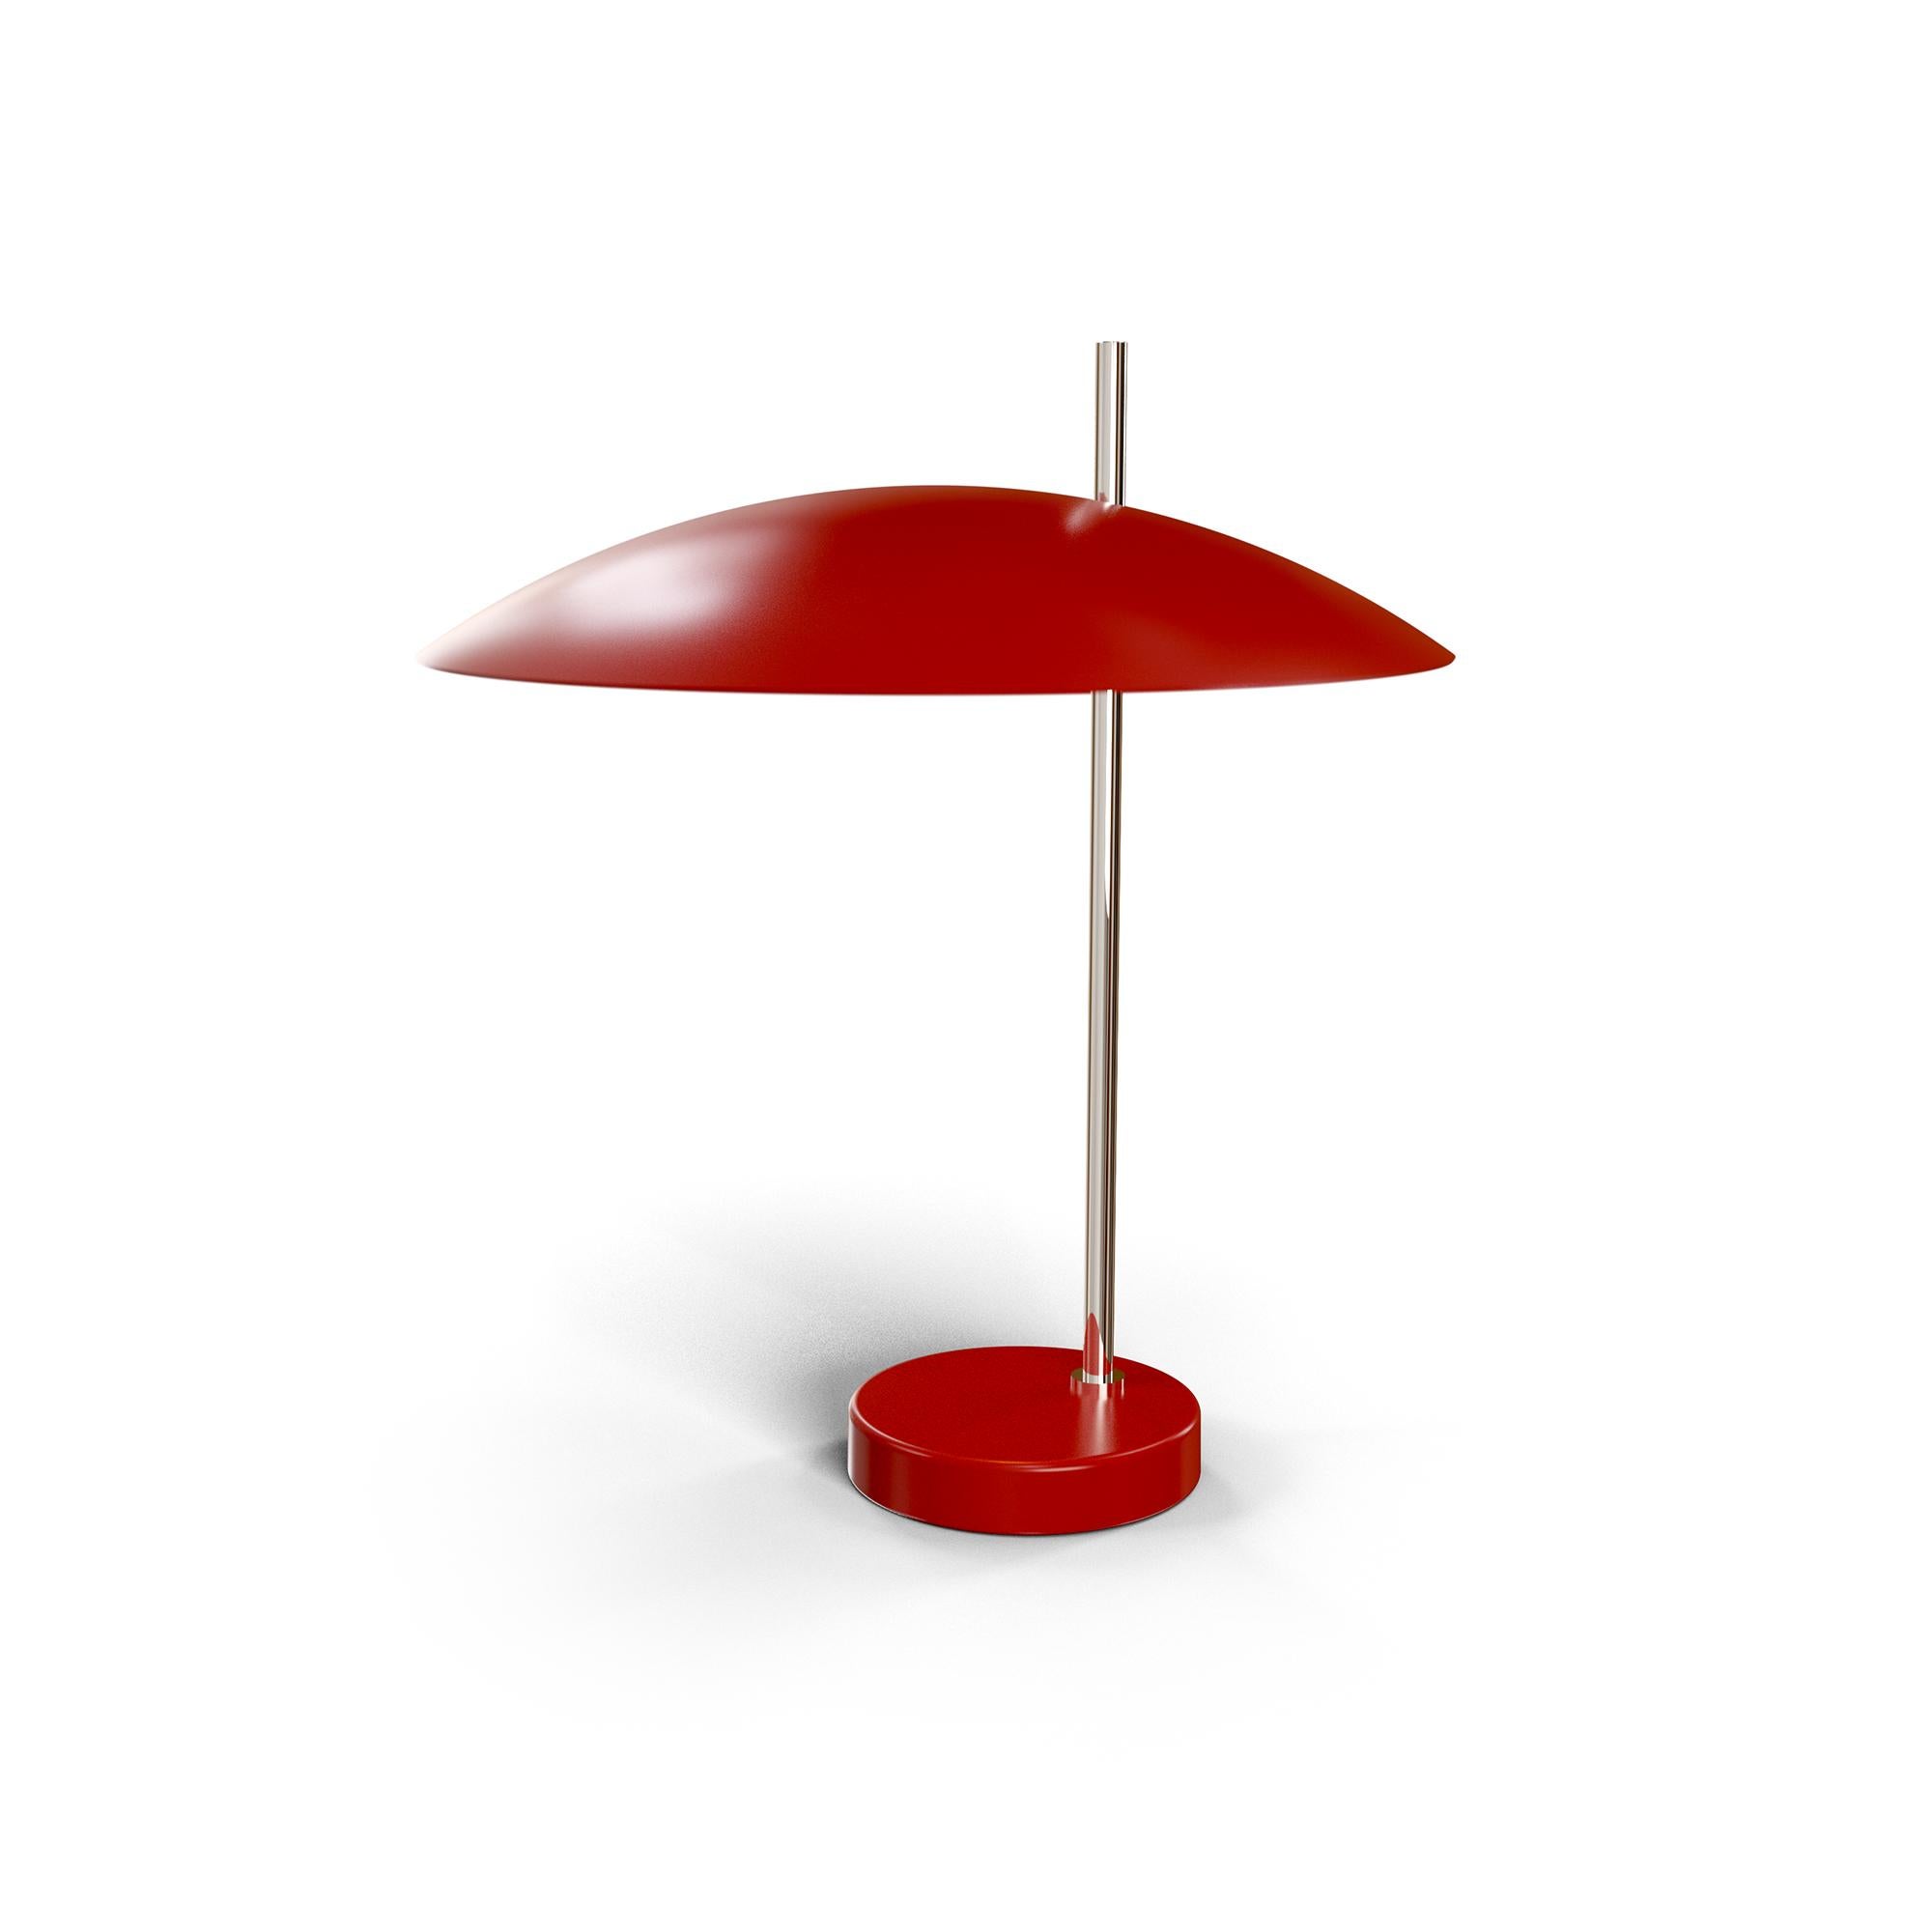 Chrome 1013 Table Lamp by Disderot
Limited Edition. 
Designed by Pierre Disderot.
Dimensions: Ø 34,1 x H 39,77 cm.
Materials: Chrome and red metal.

Delivered with authentication certificate. Made in France. Available in brushed brass, golden brass,